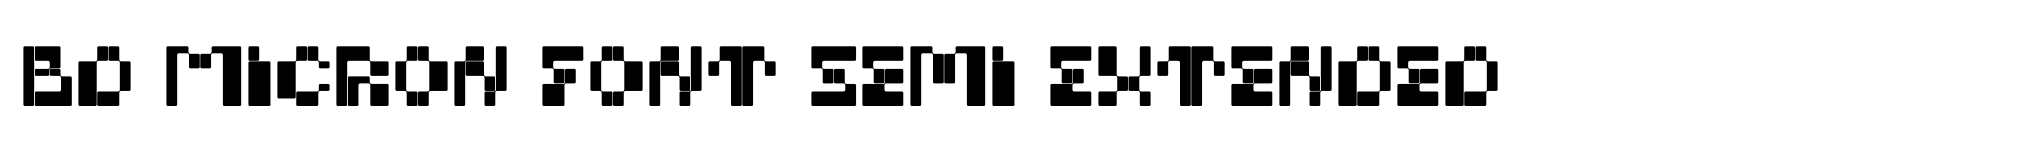 BD Micron Font Semi Extended image